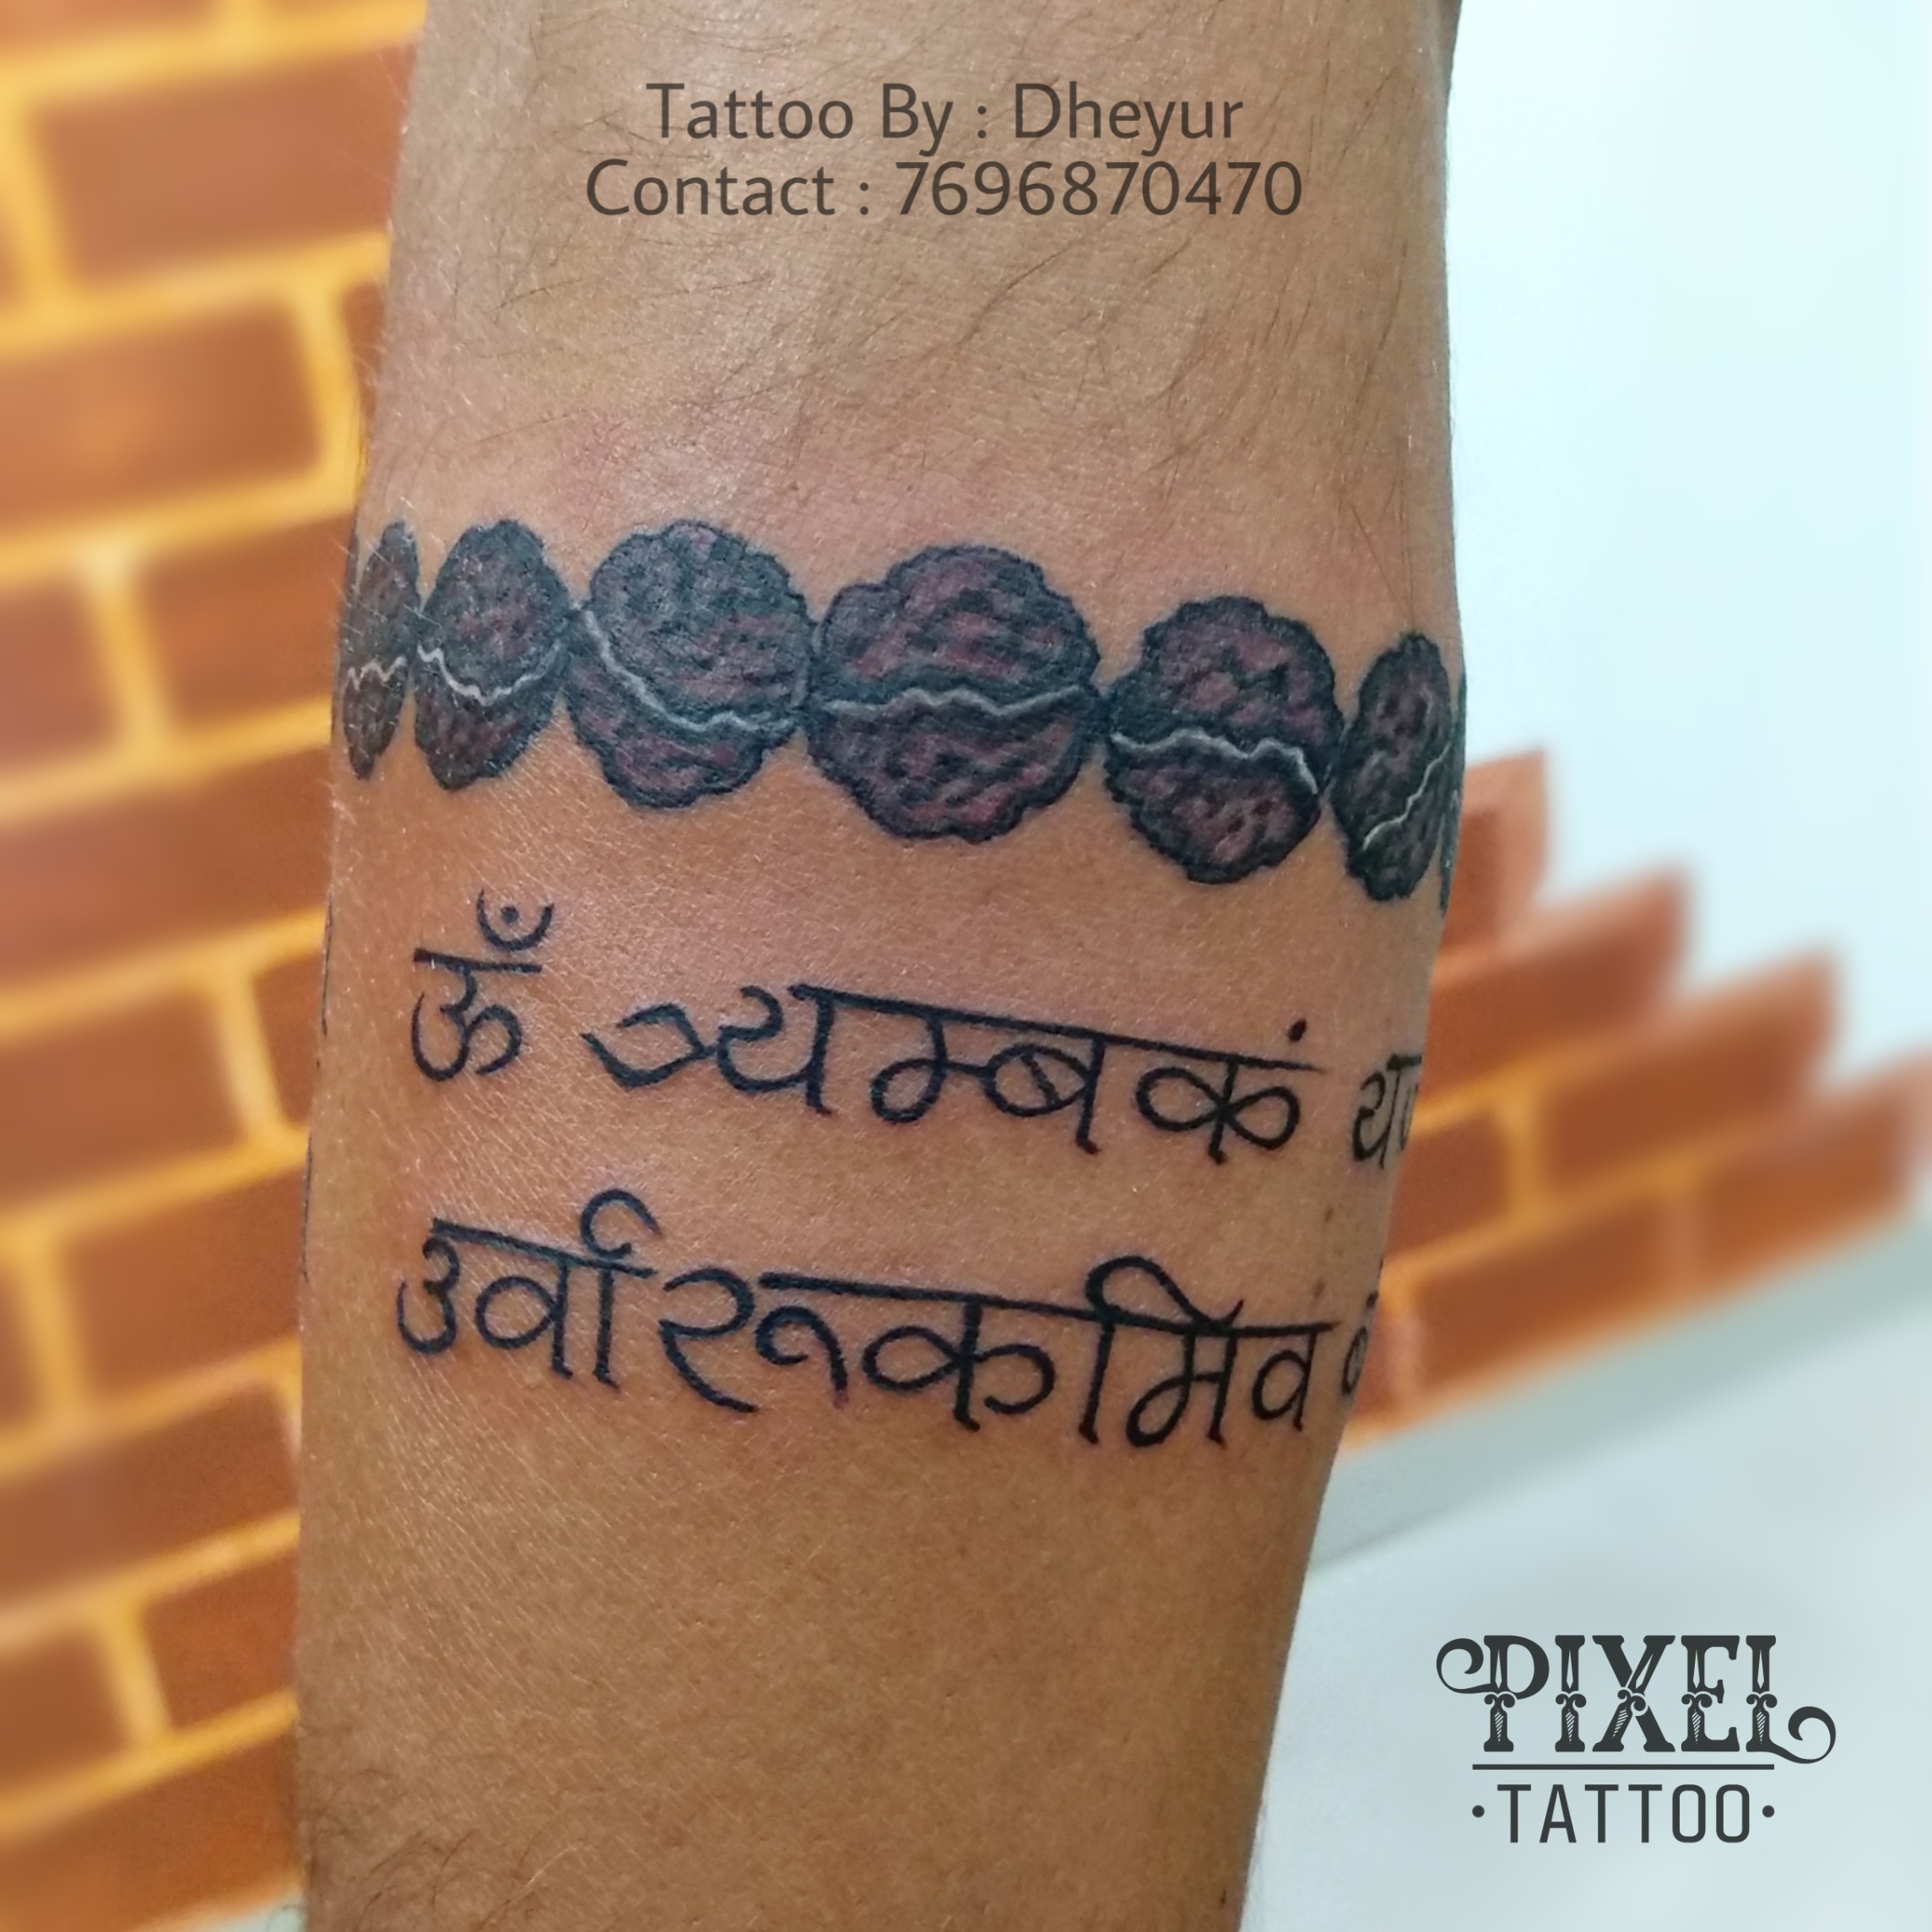 shiva  Is that ethically correct if nonvegetarian to Tattoo gods pray or  image on forearm  Hinduism Stack Exchange